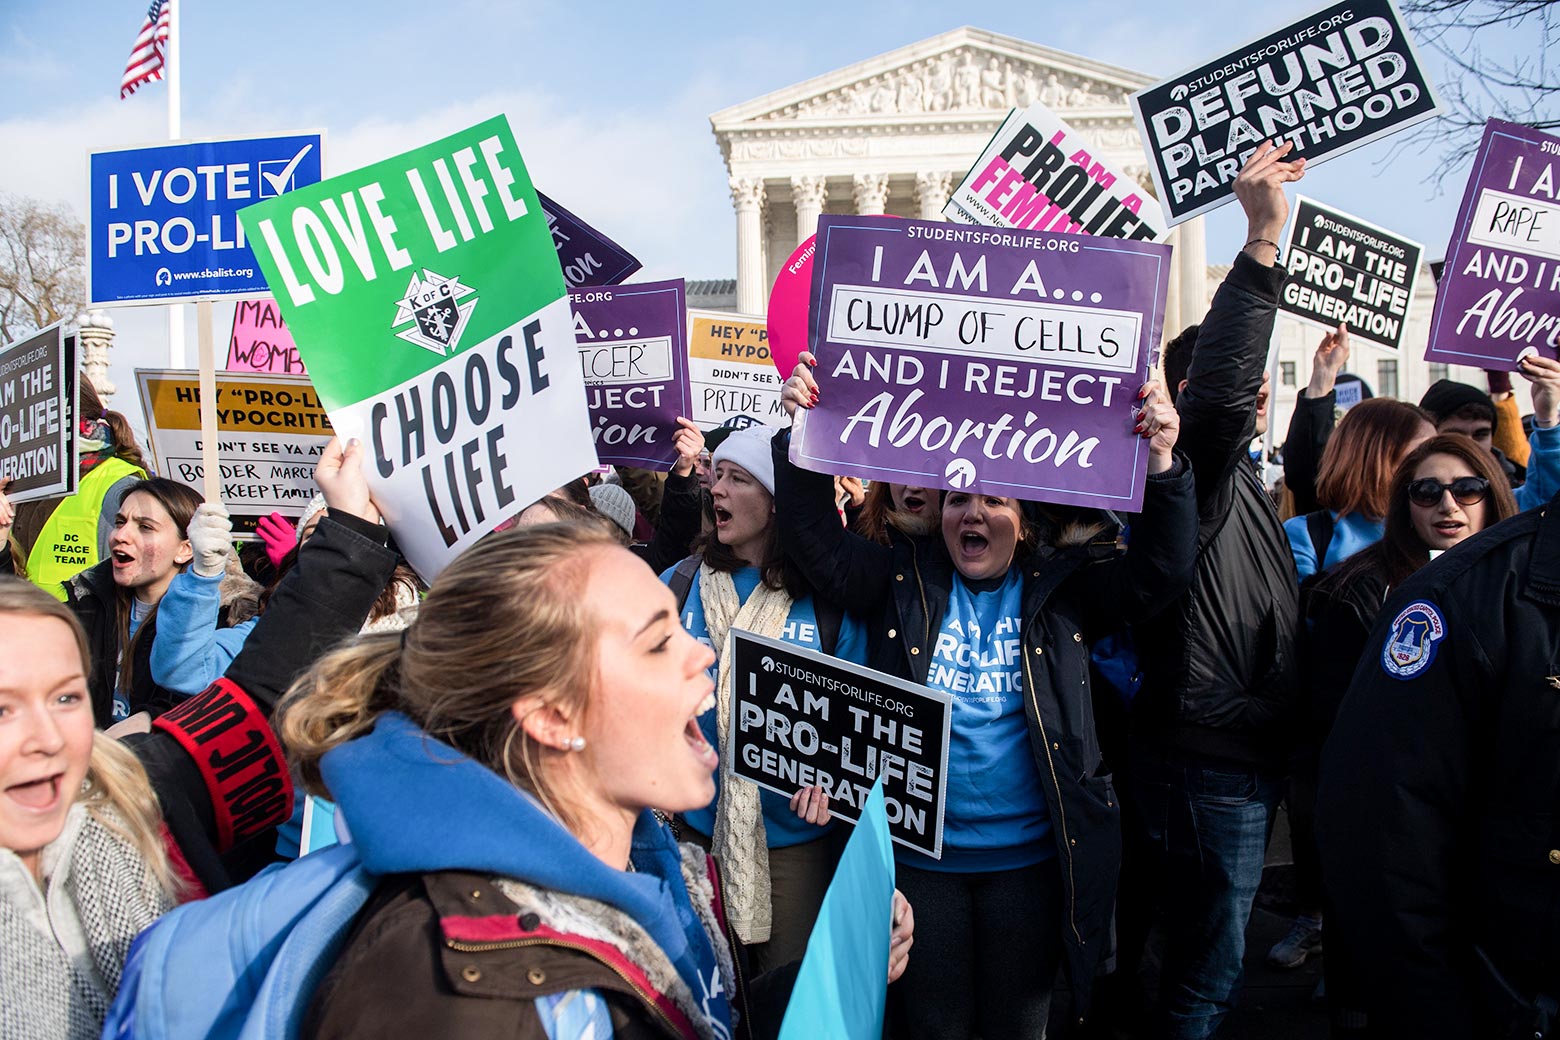 Anti-abortion protesters yell and hold up signs in front of the Supreme Court building.